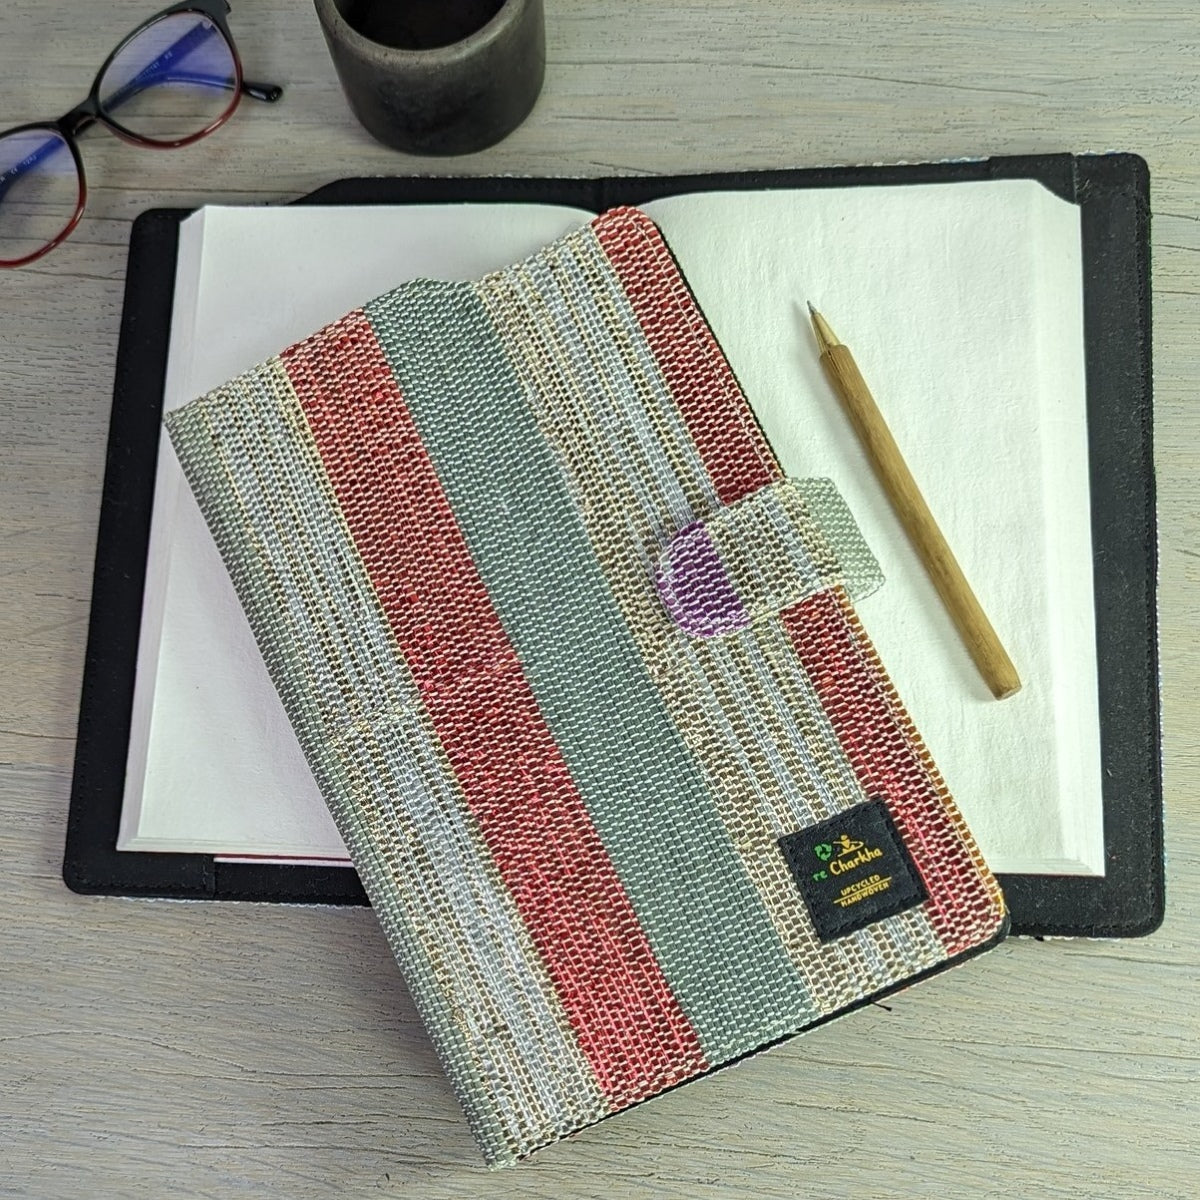 (EDC0224-105) Red Gold Glitter with Grey Bands Upcycled Handwoven Executive Diary Cover 